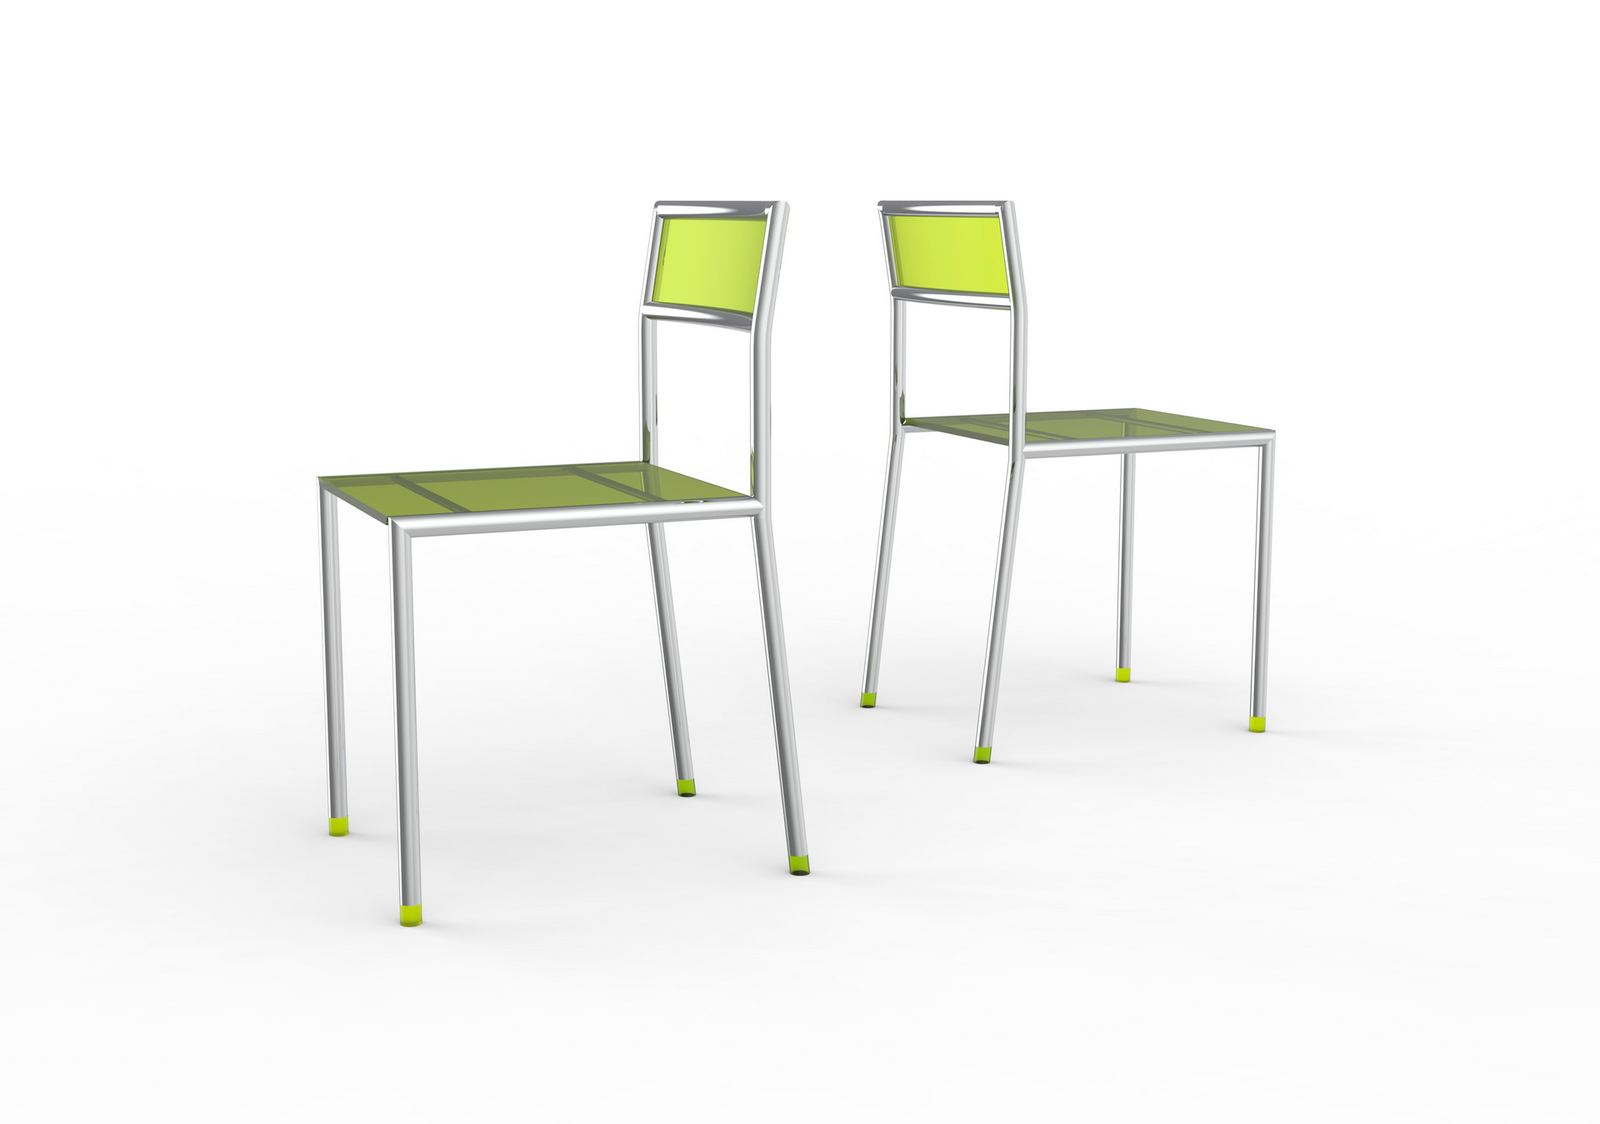 Render Shot of RIM Chair with acrylic elements in chartreuse